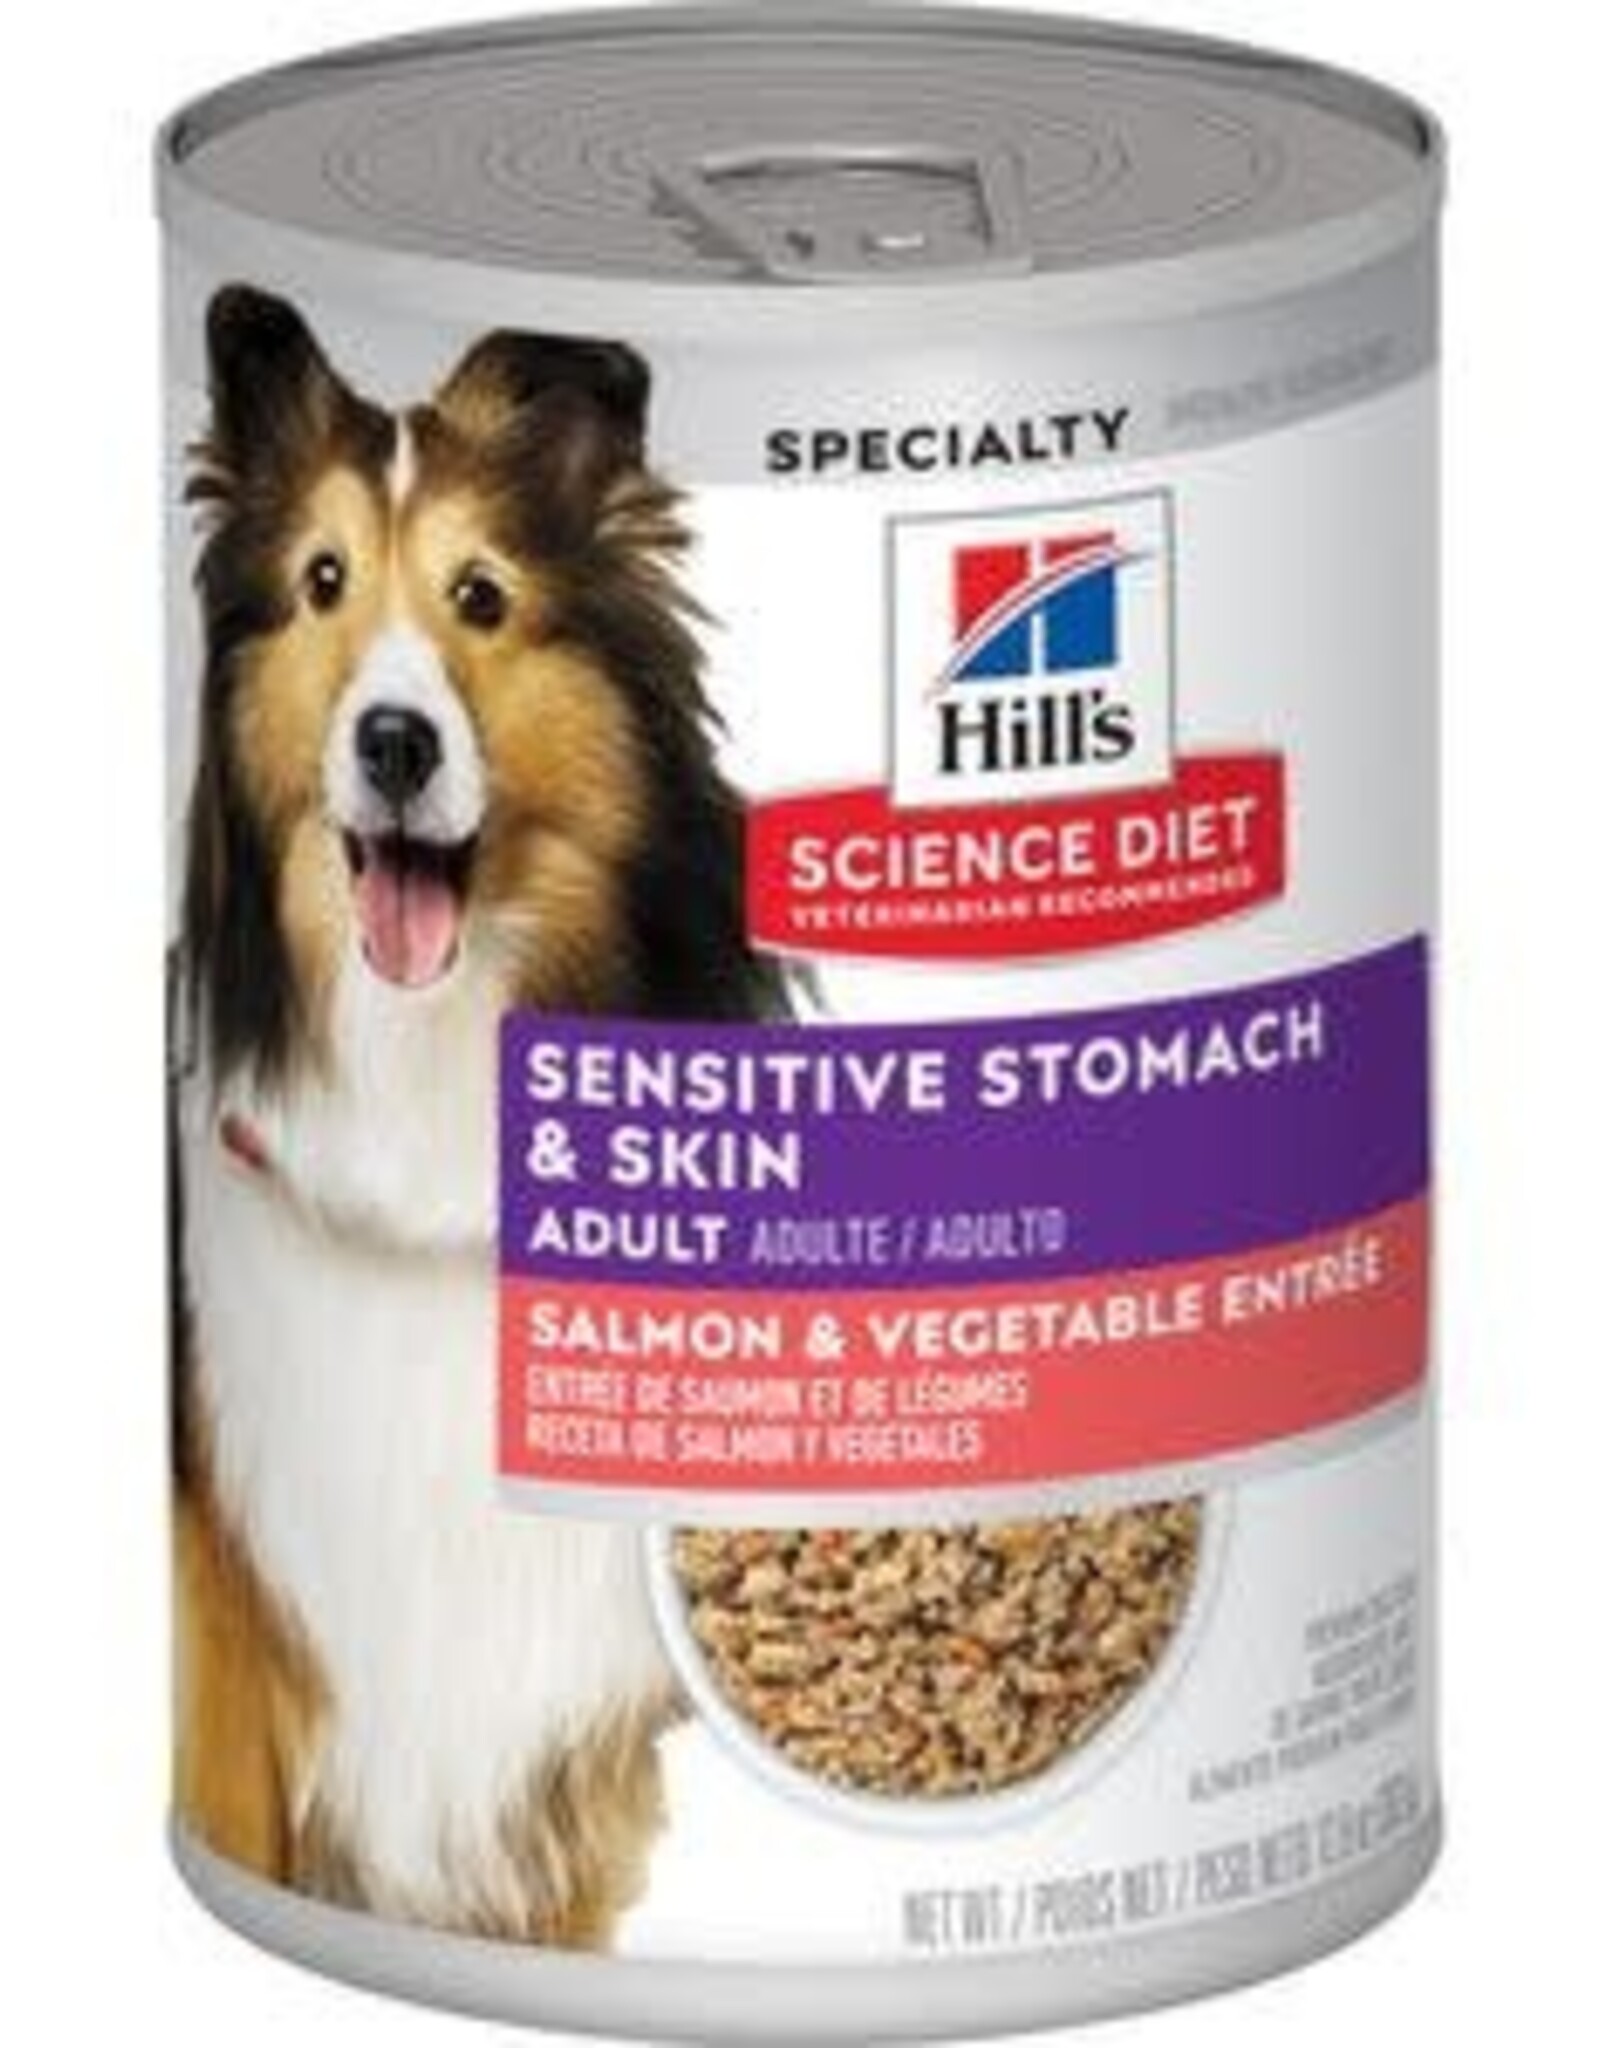 SCIENCE DIET HILL'S SCIENCE DIET DOG ADULT SENSITIVE STOMACH & SKIN SALMON CAN 12.8OZ CASE OF 12